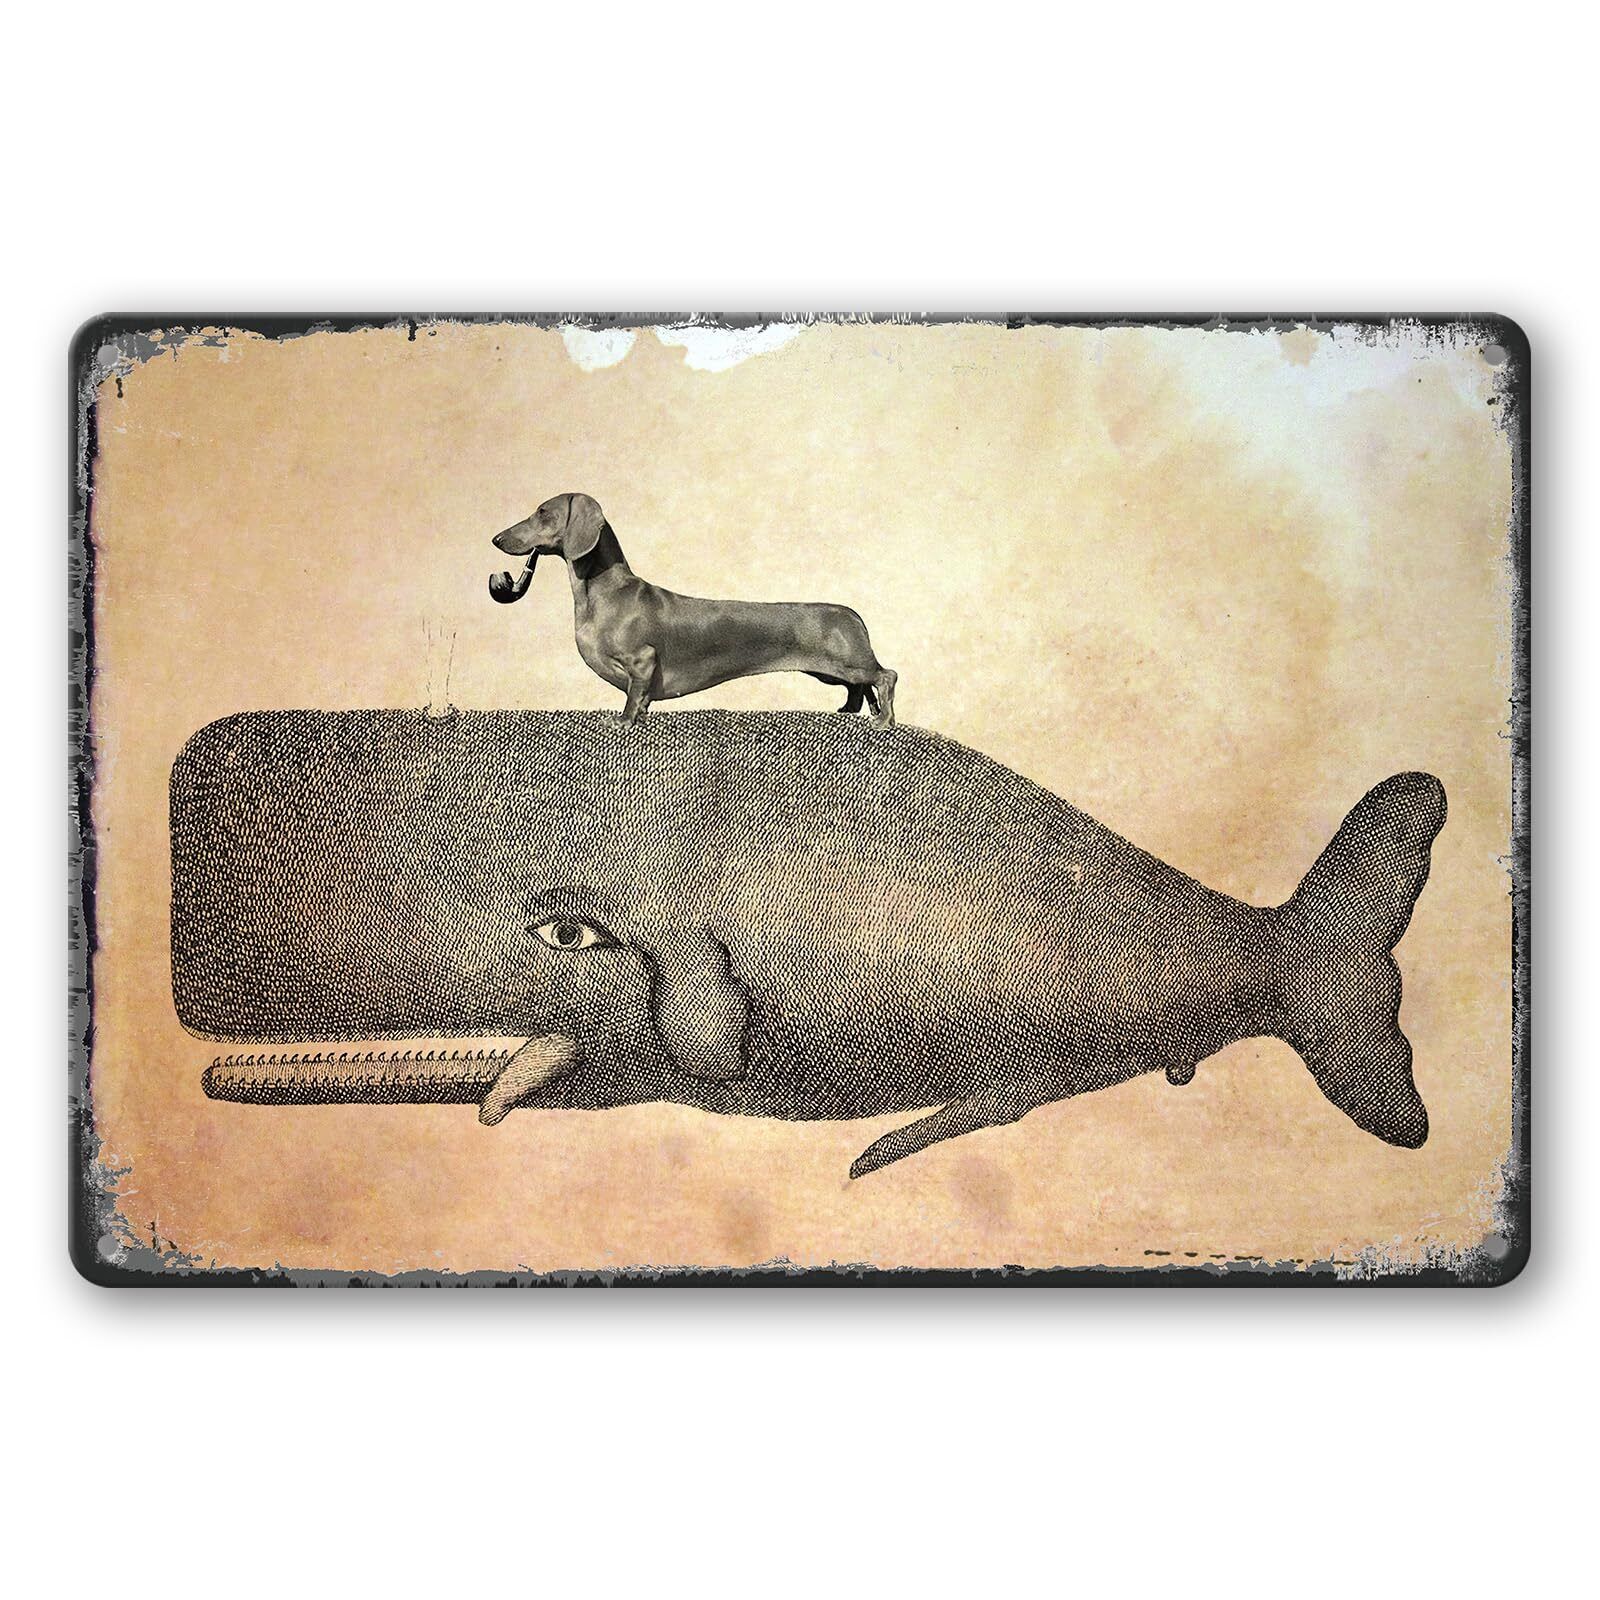 Vintage Wiener Dog Riding Whale Metal Tin Sign, Dachshund Gifts for Women, Do...